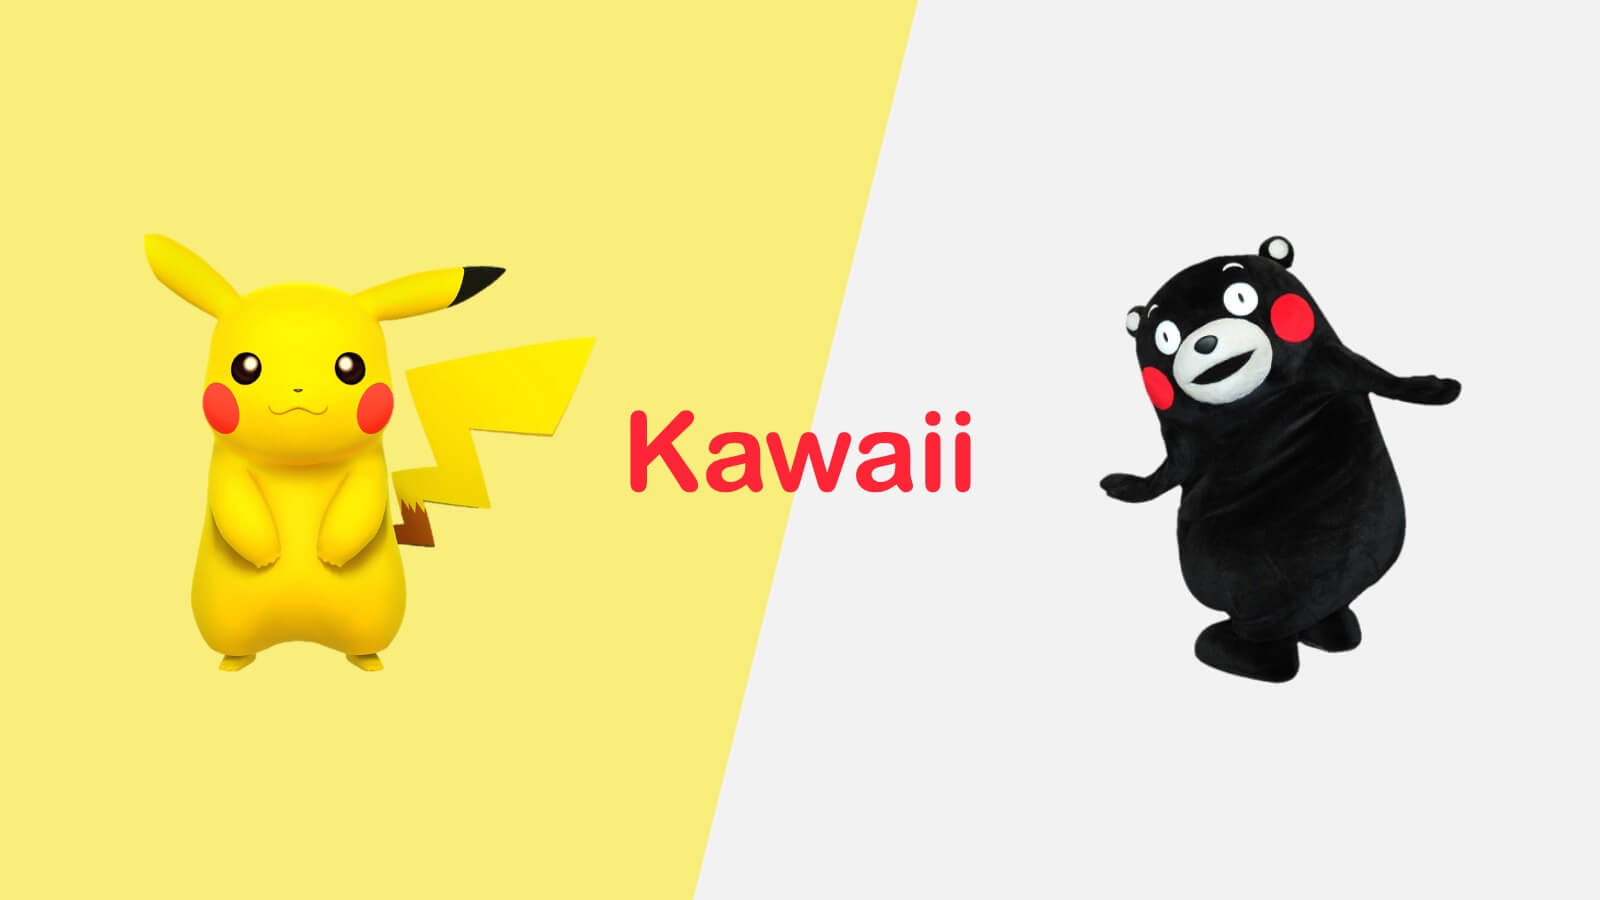 10 Free Kawaii Templates for Google Slides & PowerPoint Will Make You Say  